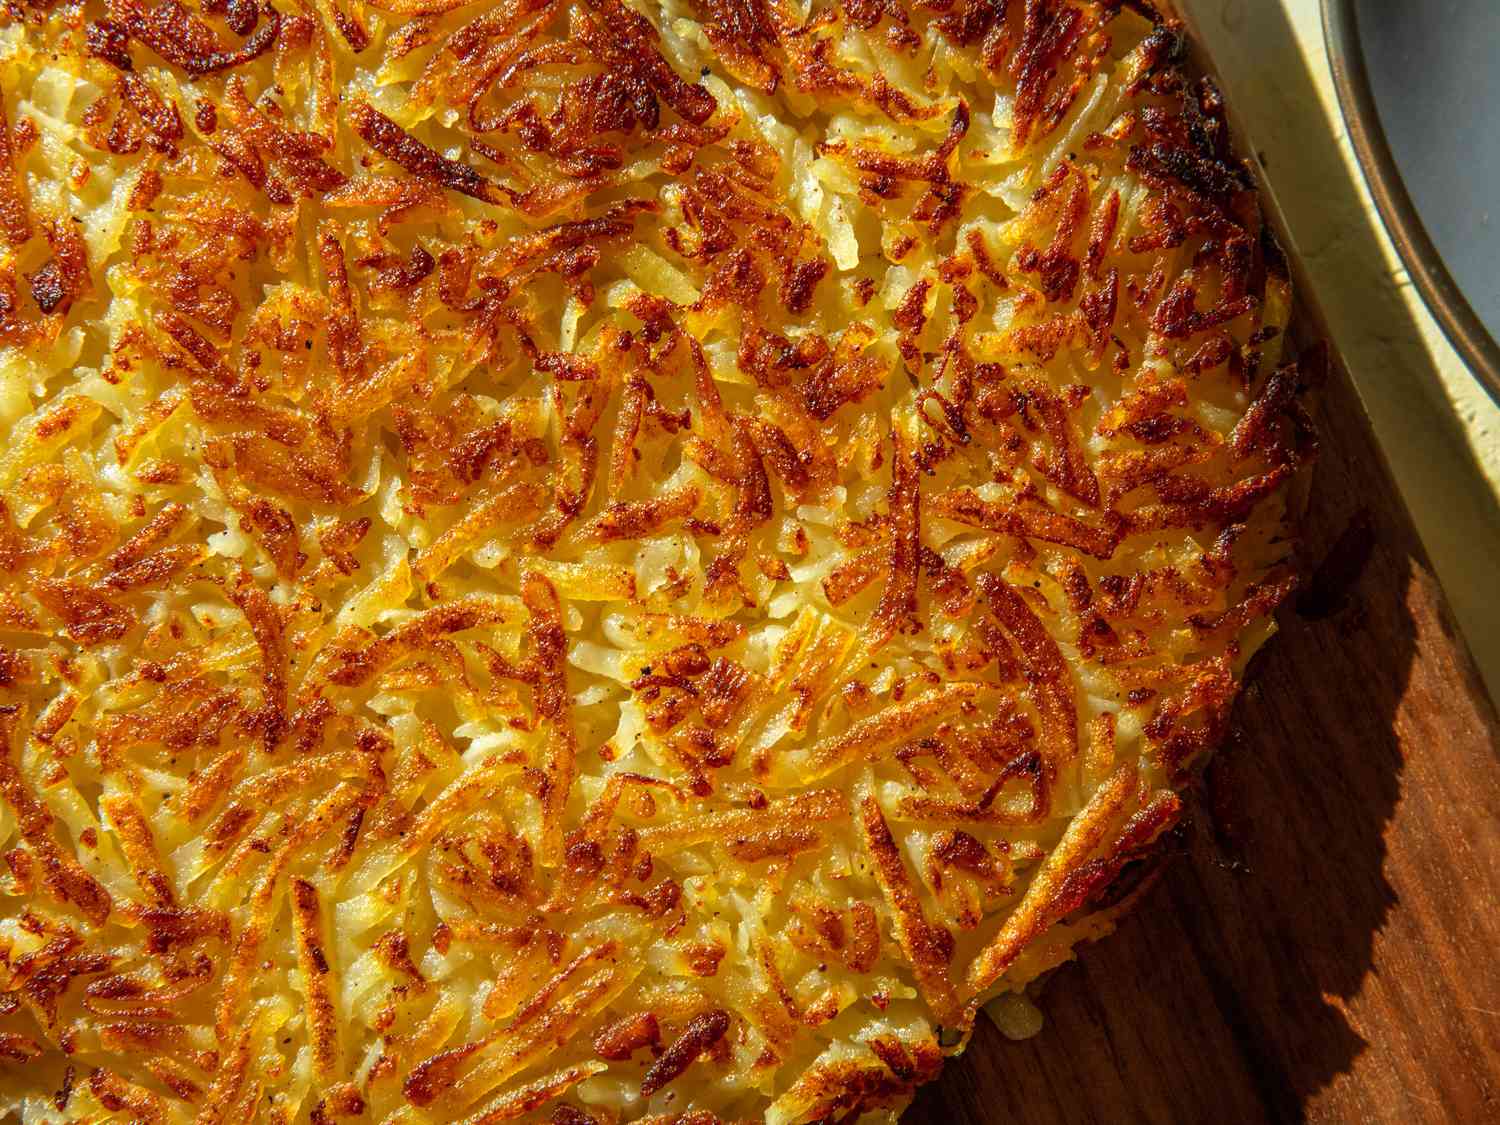 RÃ¶sti, finished on a platter, showing deep browning and crisping on surface.